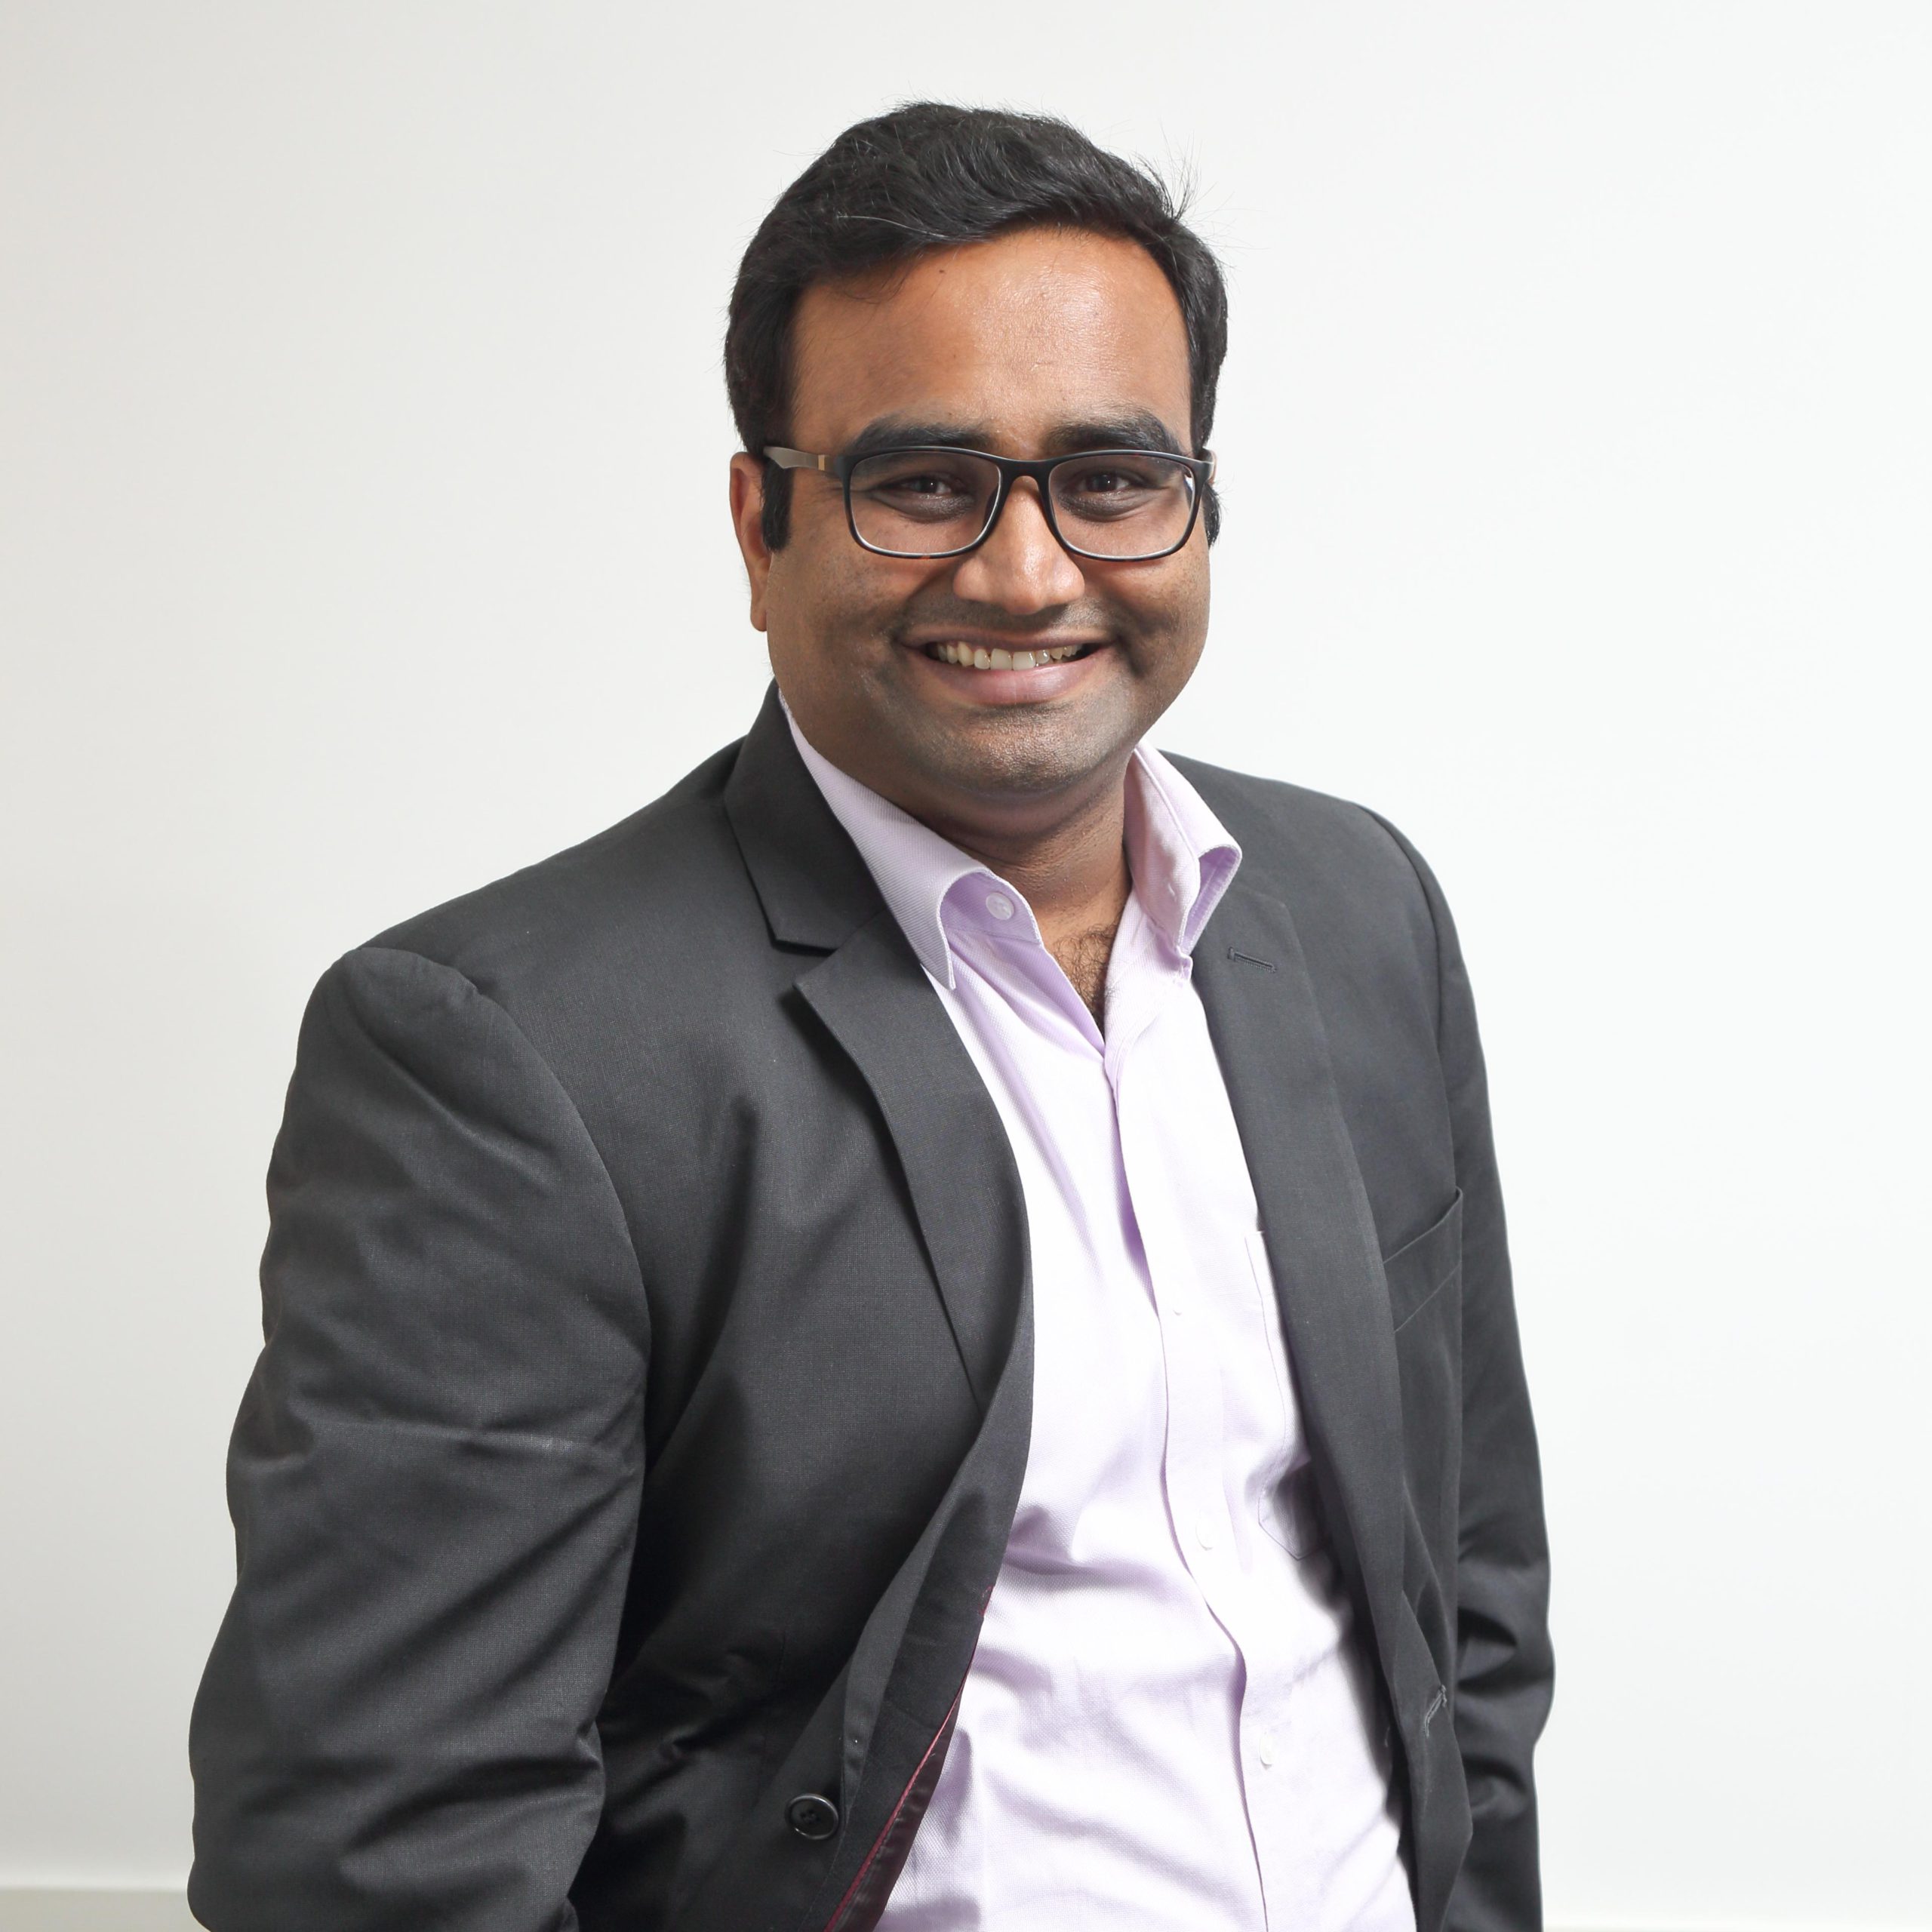 4 thoughts on audio social platforms from Vikas Malpani, co-founder of Leher